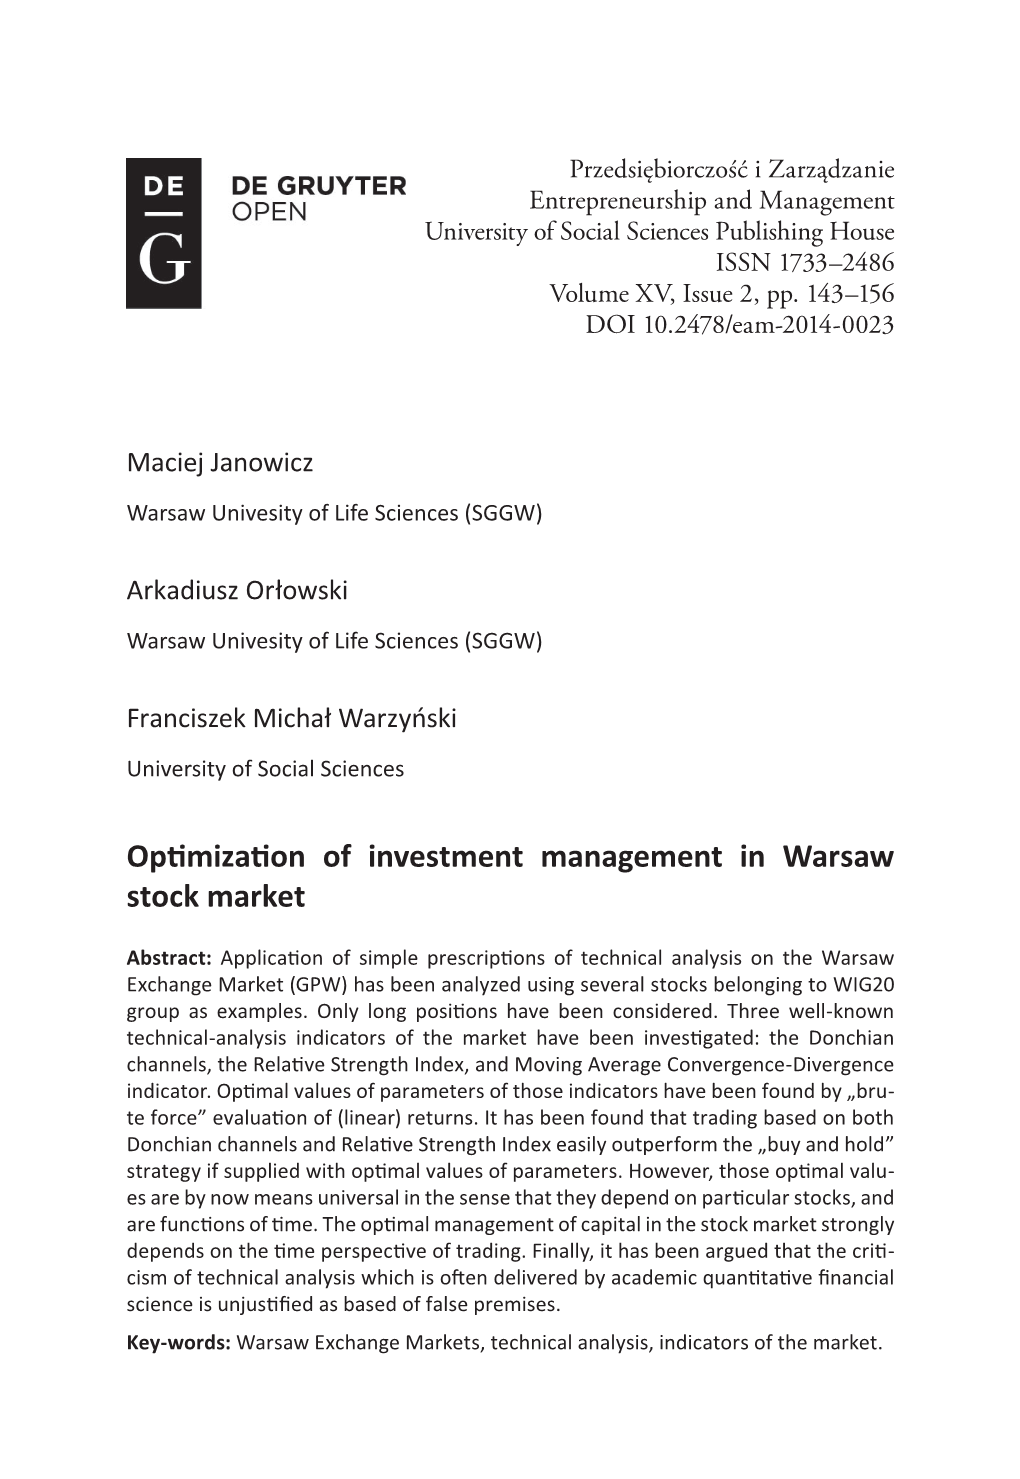 Optimization of Investment Management in Warsaw Stock Market